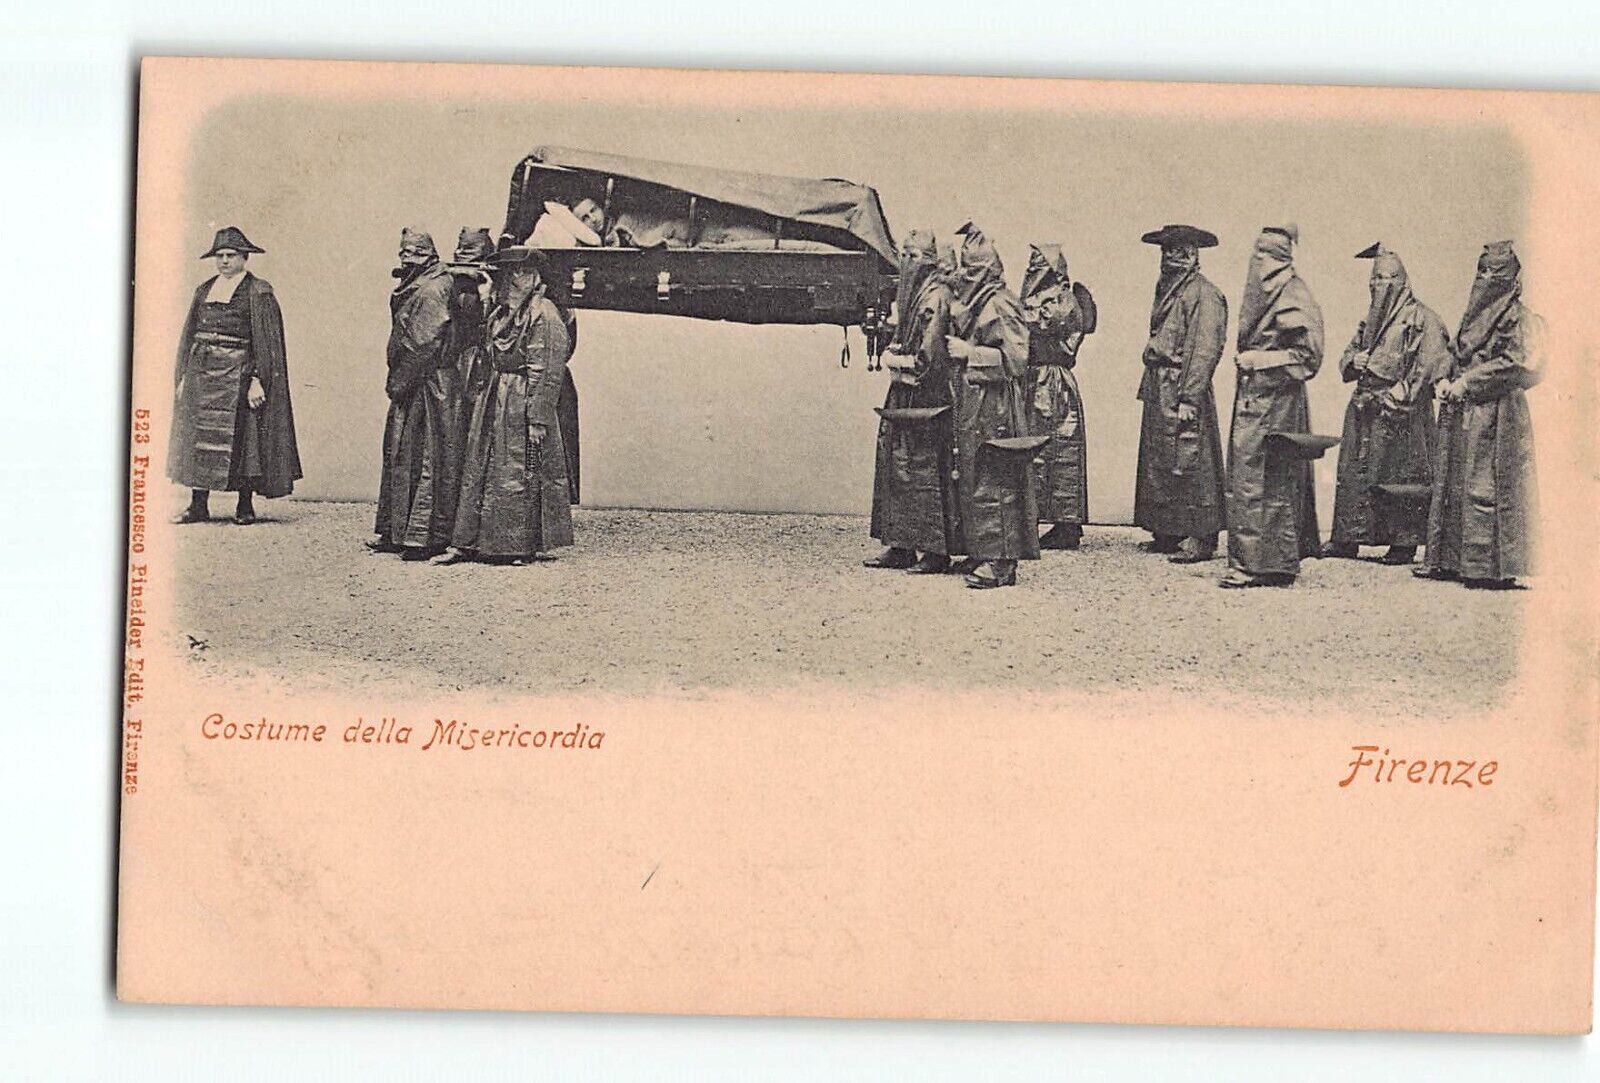 Old Vintage Postcard of Costume della Misericordia Firenze Florence Italy